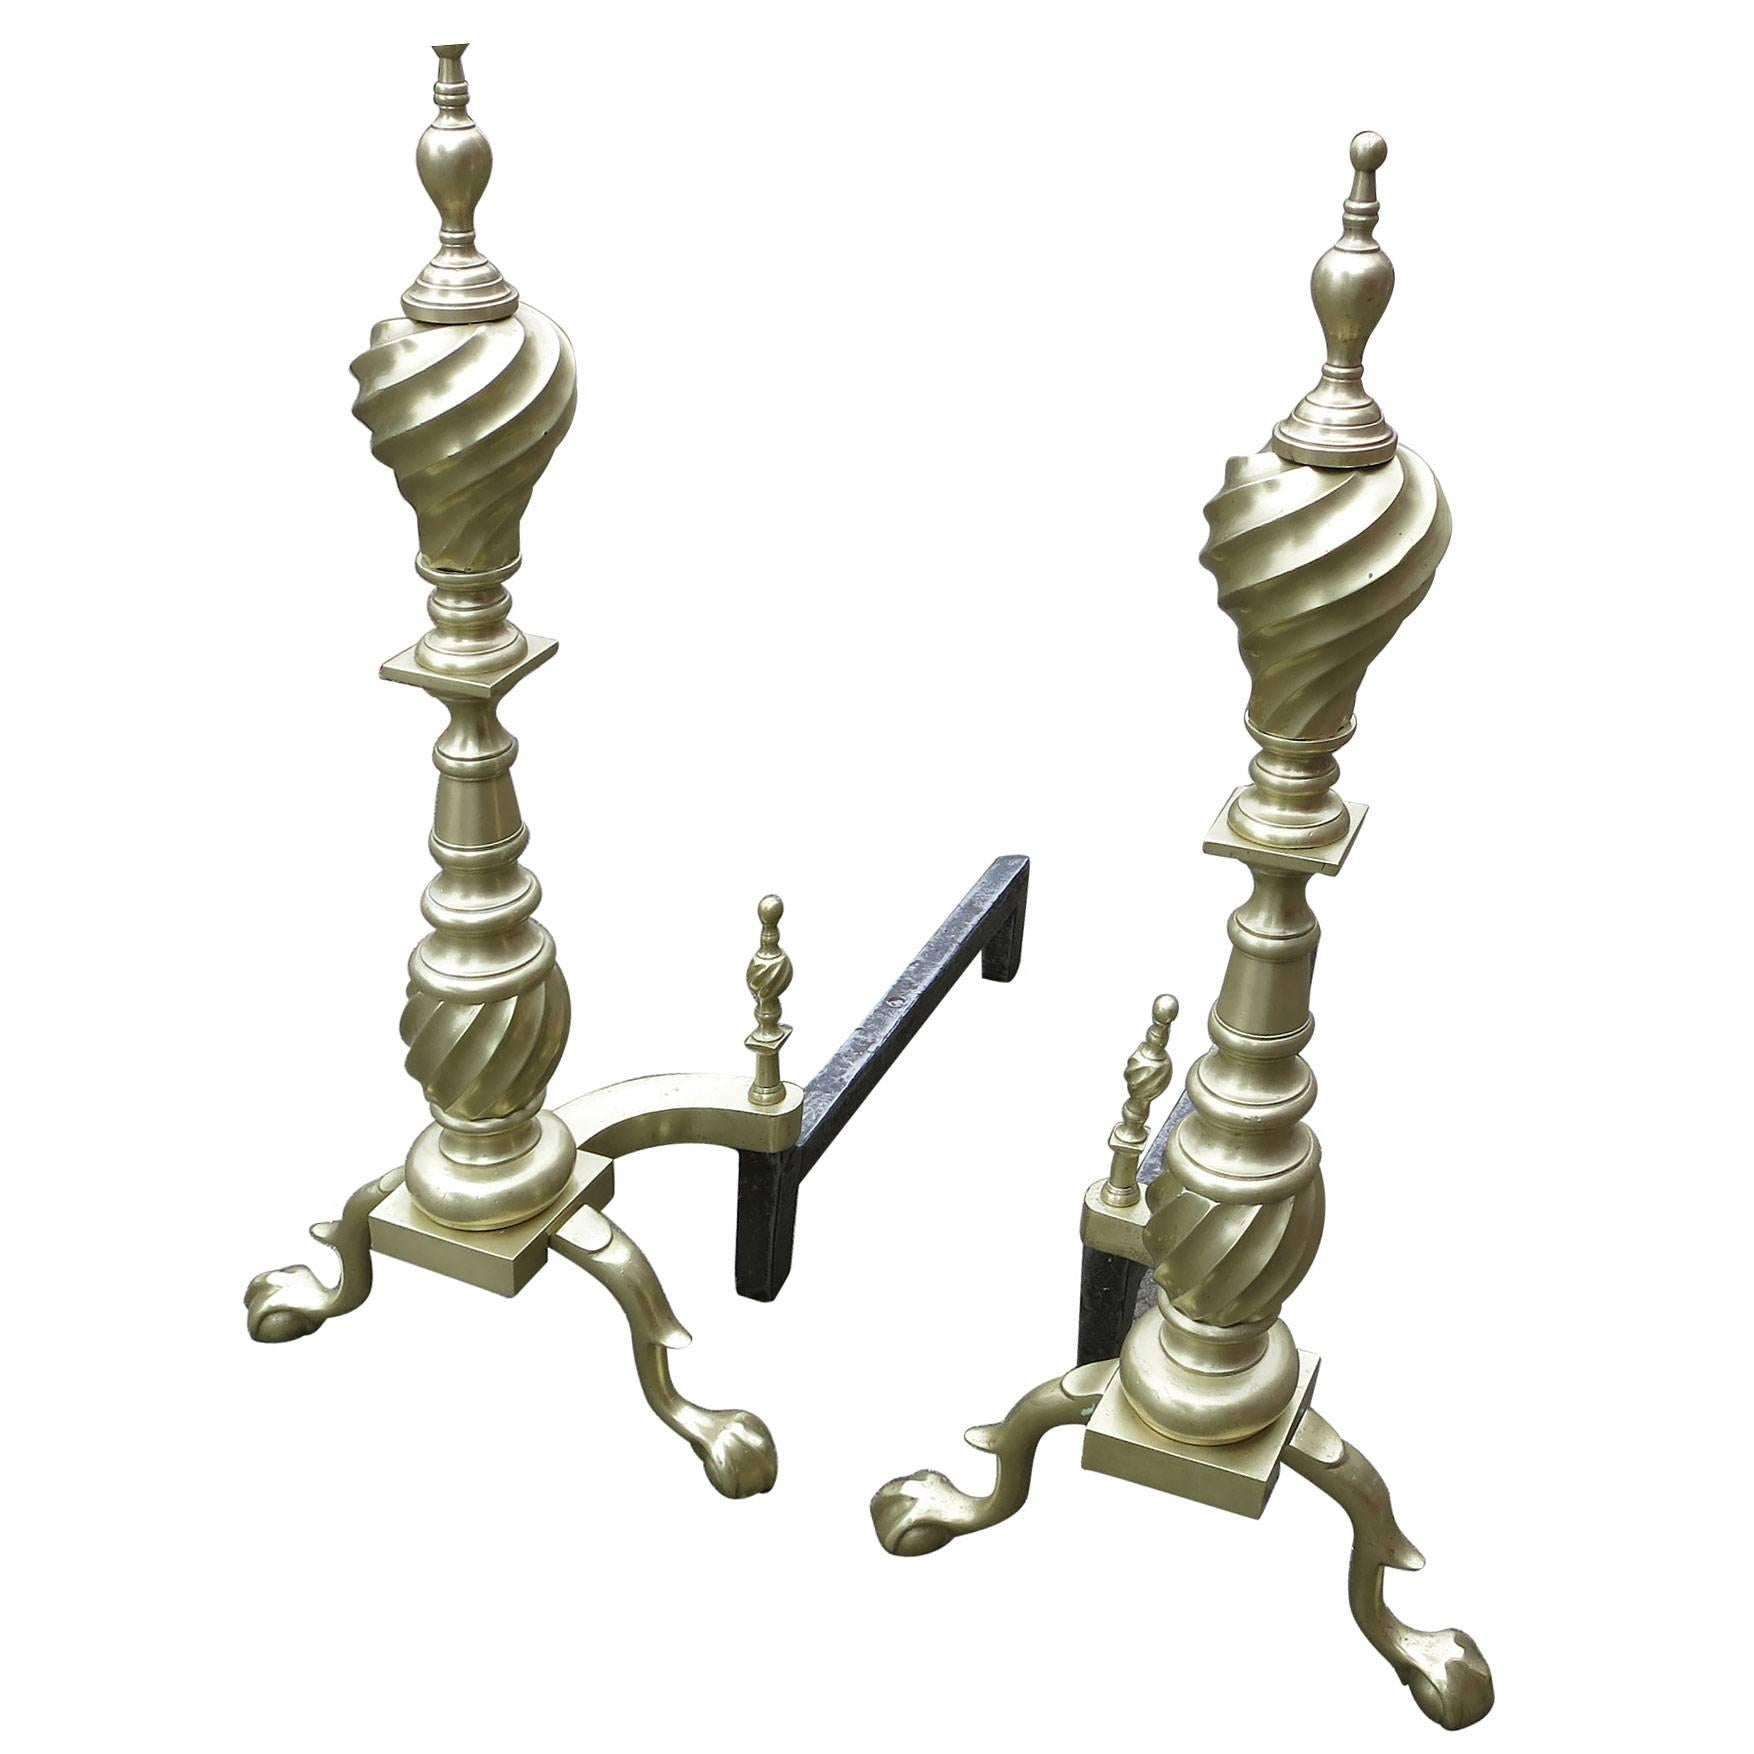 Pair of late Victorian spiral Chippendale style brass andirons with each matching having spiral flame and rounded finials above a spiral baluster-shaped shaft over a plinth (with “cupid's bow” shaped skirt) resting on double spurred cabriole legs